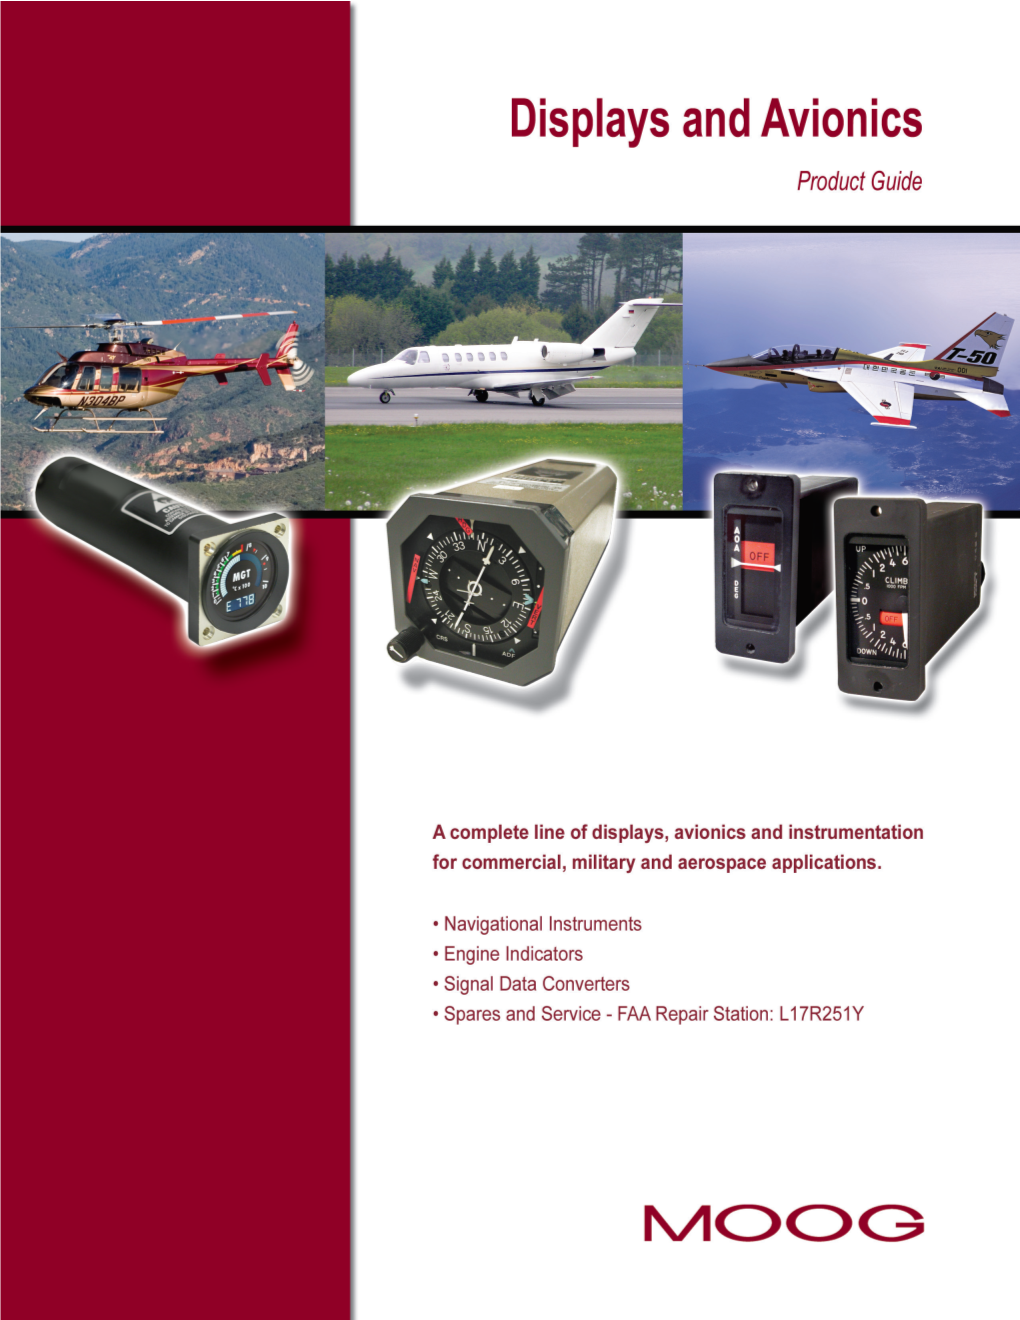 Displays and Avionics Product Guide